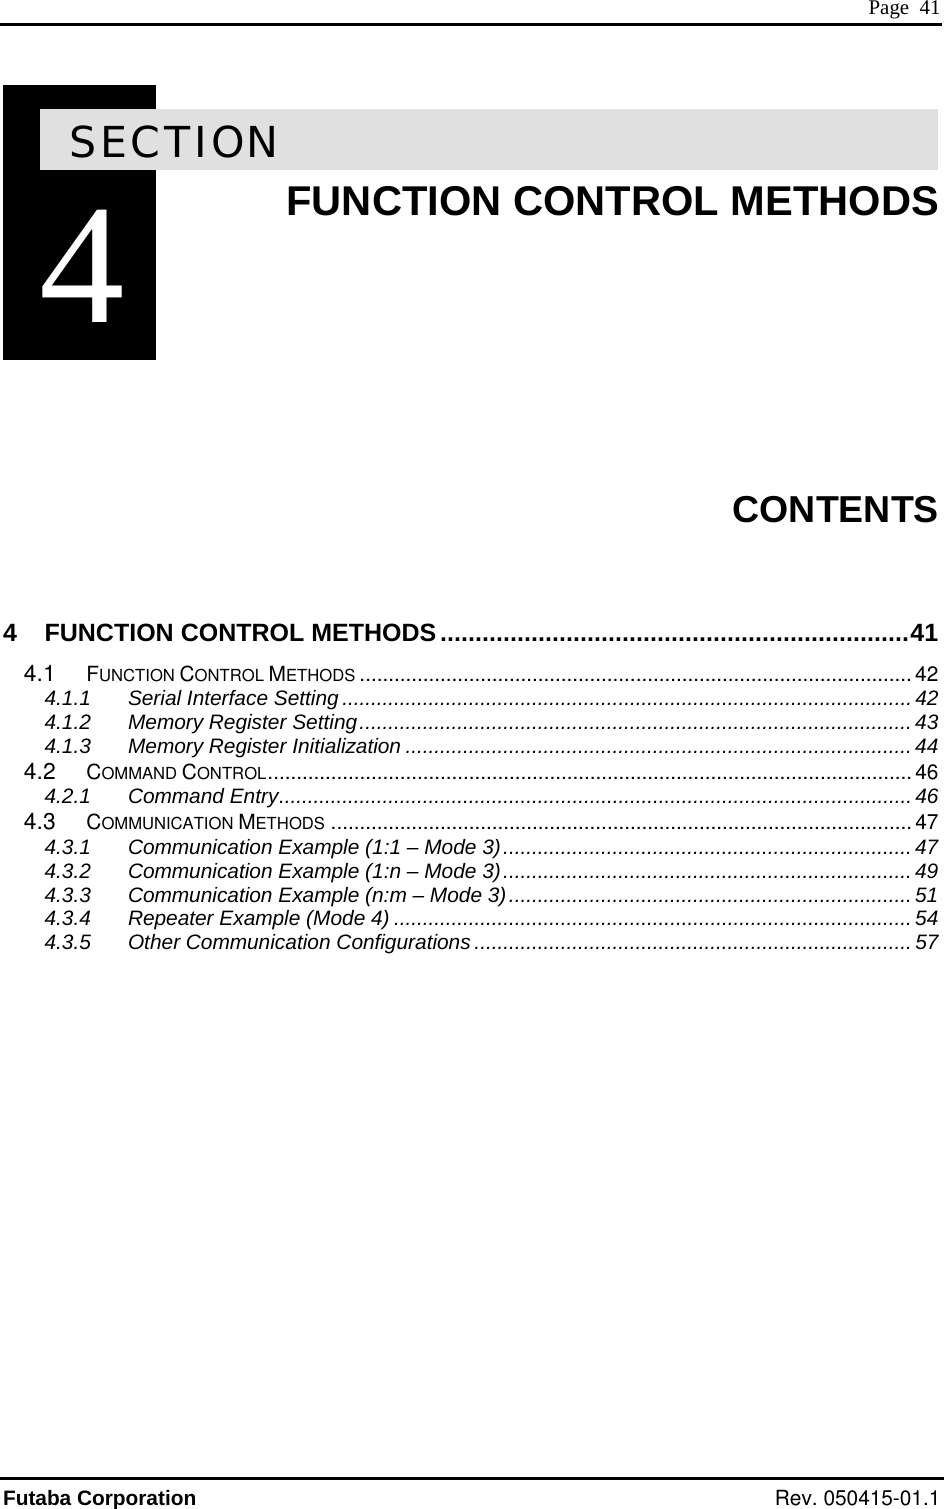  Page  41 4SECTION  4  FUNCTION CONTROL METHODS        CONTENTS  4 FUNCTION CONTROL METHODS...................................................................41 4.1 FUNCTION CONTROL METHODS ................................................................................................ 42 4.1.1 Serial Interface Setting ................................................................................................... 42 4.1.2 Memory Register Setting................................................................................................43 4.1.3 Memory Register Initialization ........................................................................................44 4.2 COMMAND CONTROL................................................................................................................ 46 4.2.1 Command Entry..............................................................................................................46 4.3 COMMUNICATION METHODS ..................................................................................................... 47 4.3.1 Communication Example (1:1 – Mode 3)....................................................................... 47 4.3.2 Communication Example (1:n – Mode 3)....................................................................... 49 4.3.3 Communication Example (n:m – Mode 3)...................................................................... 51 4.3.4 Repeater Example (Mode 4) .......................................................................................... 54 4.3.5 Other Communication Configurations ............................................................................ 57                  Futaba Corporation Rev. 050415-01.1 